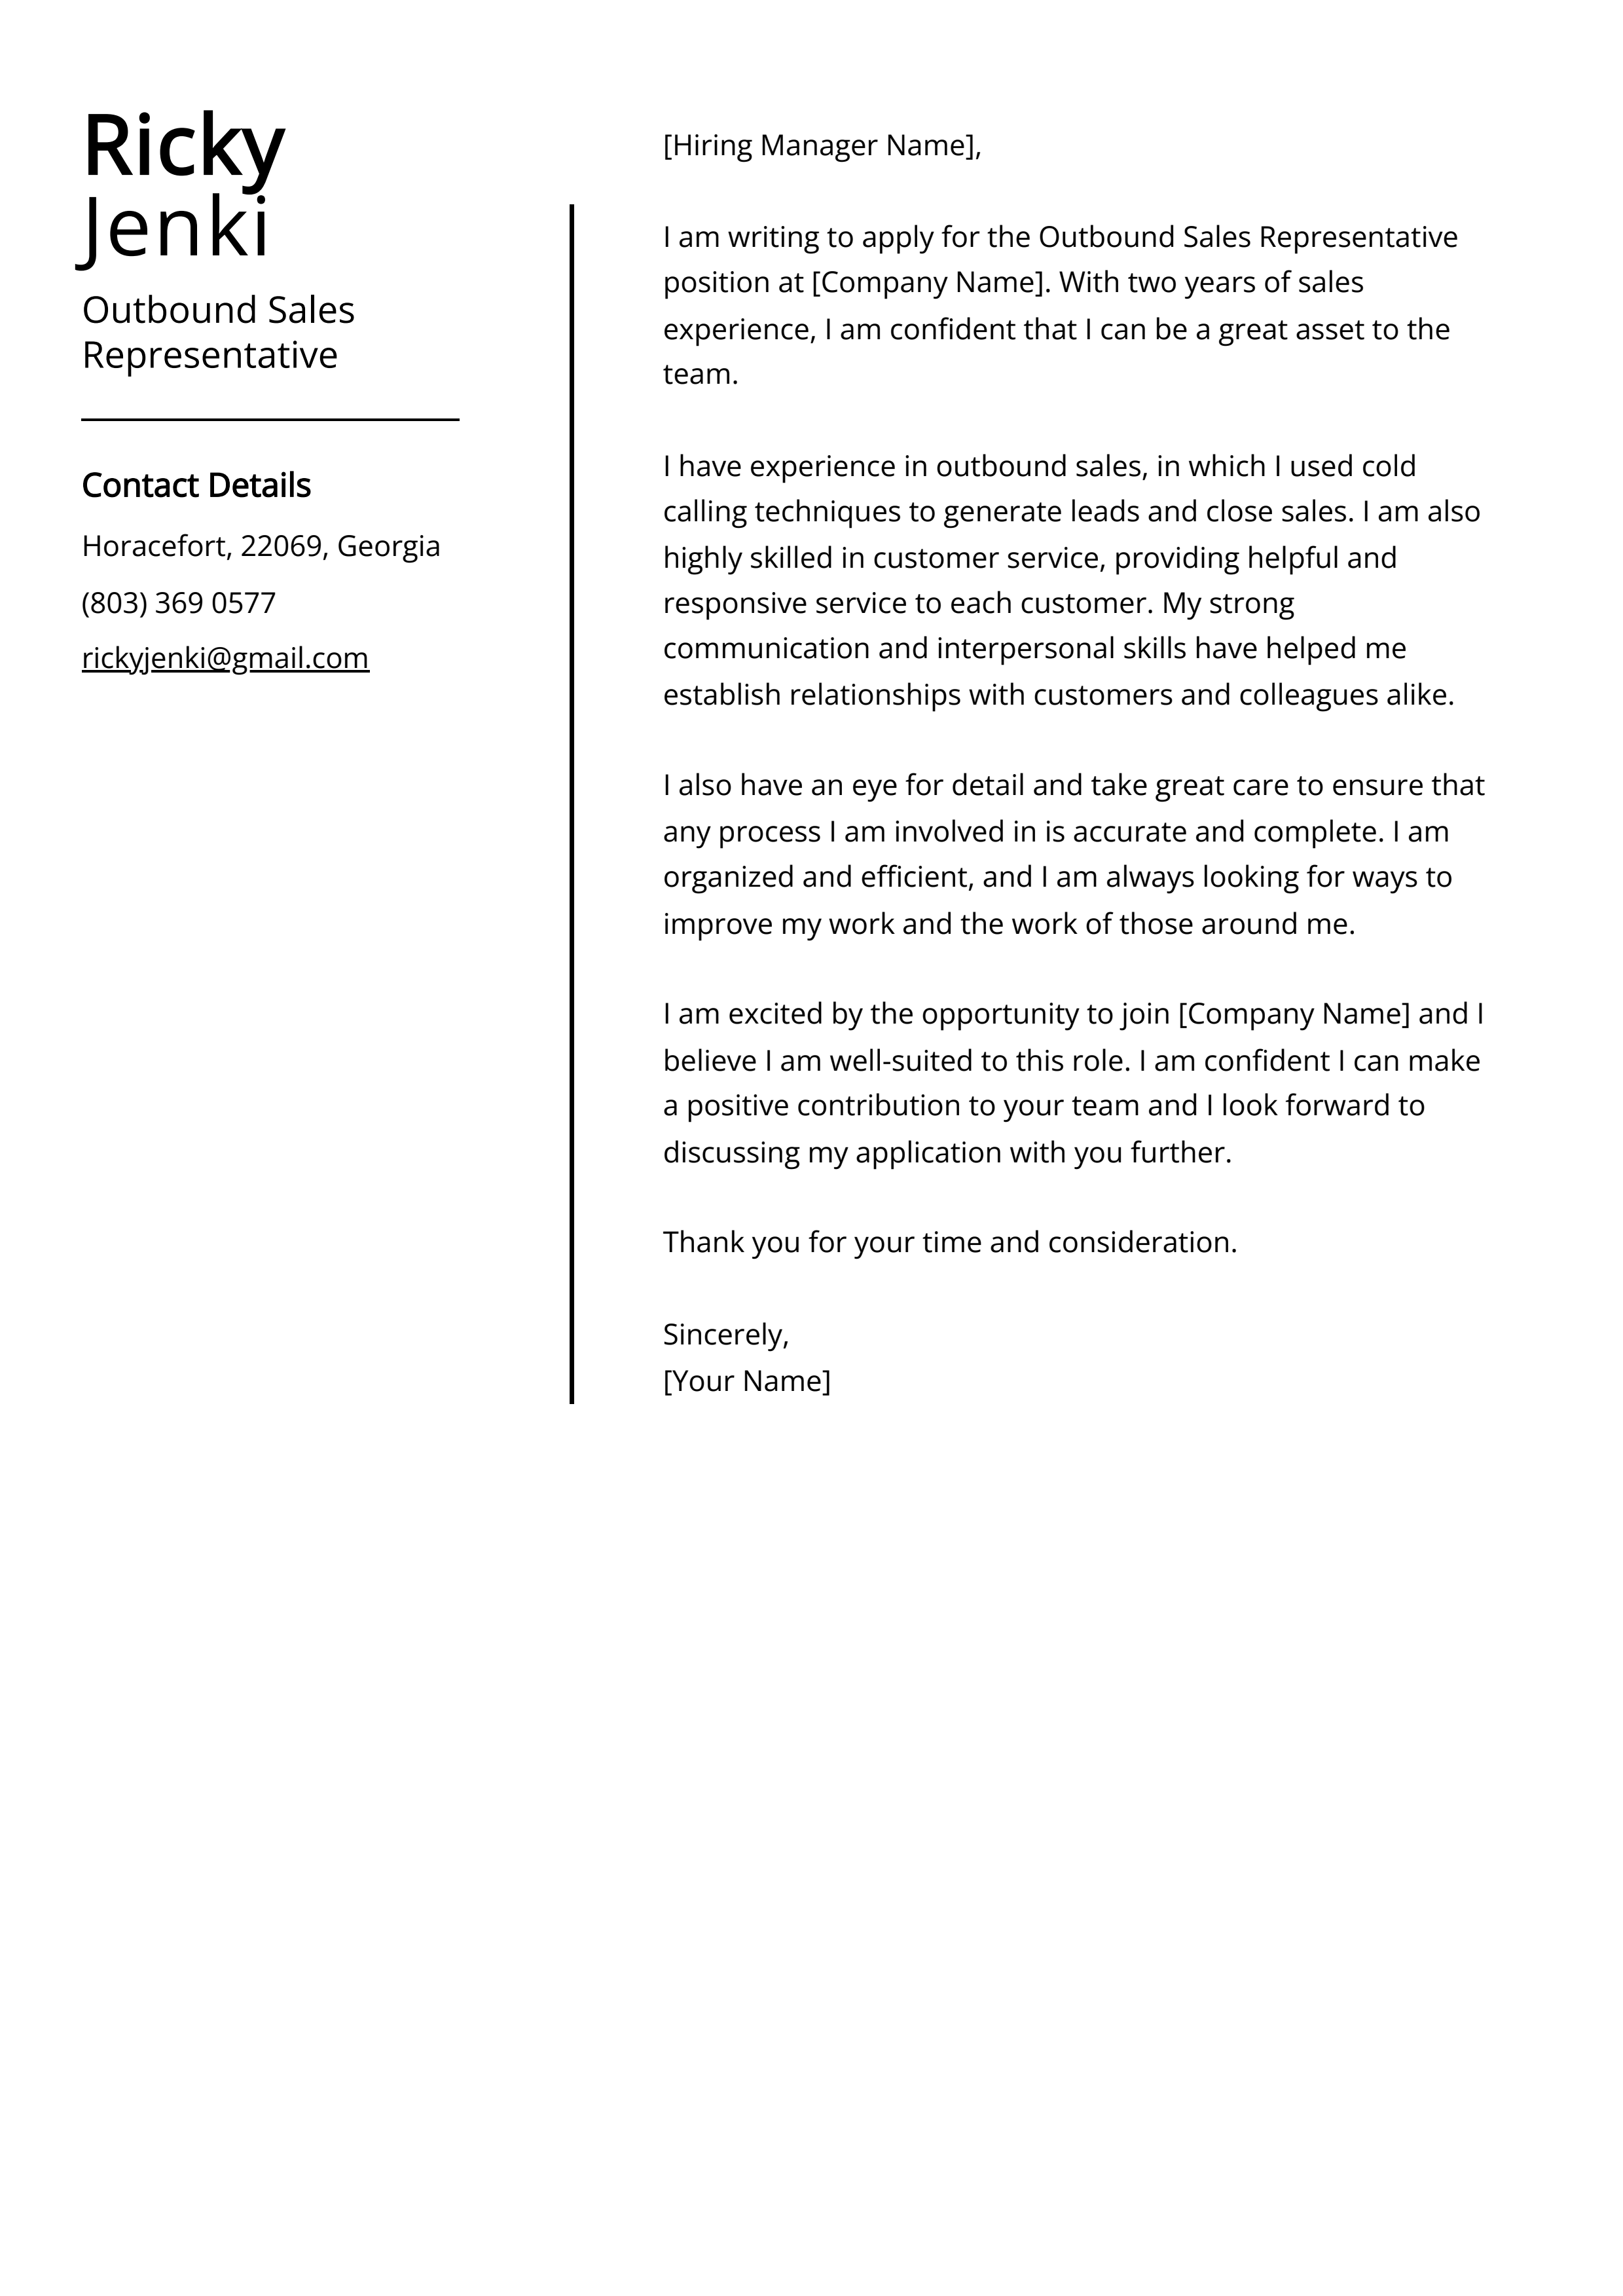 Outbound Sales Representative Cover Letter Example